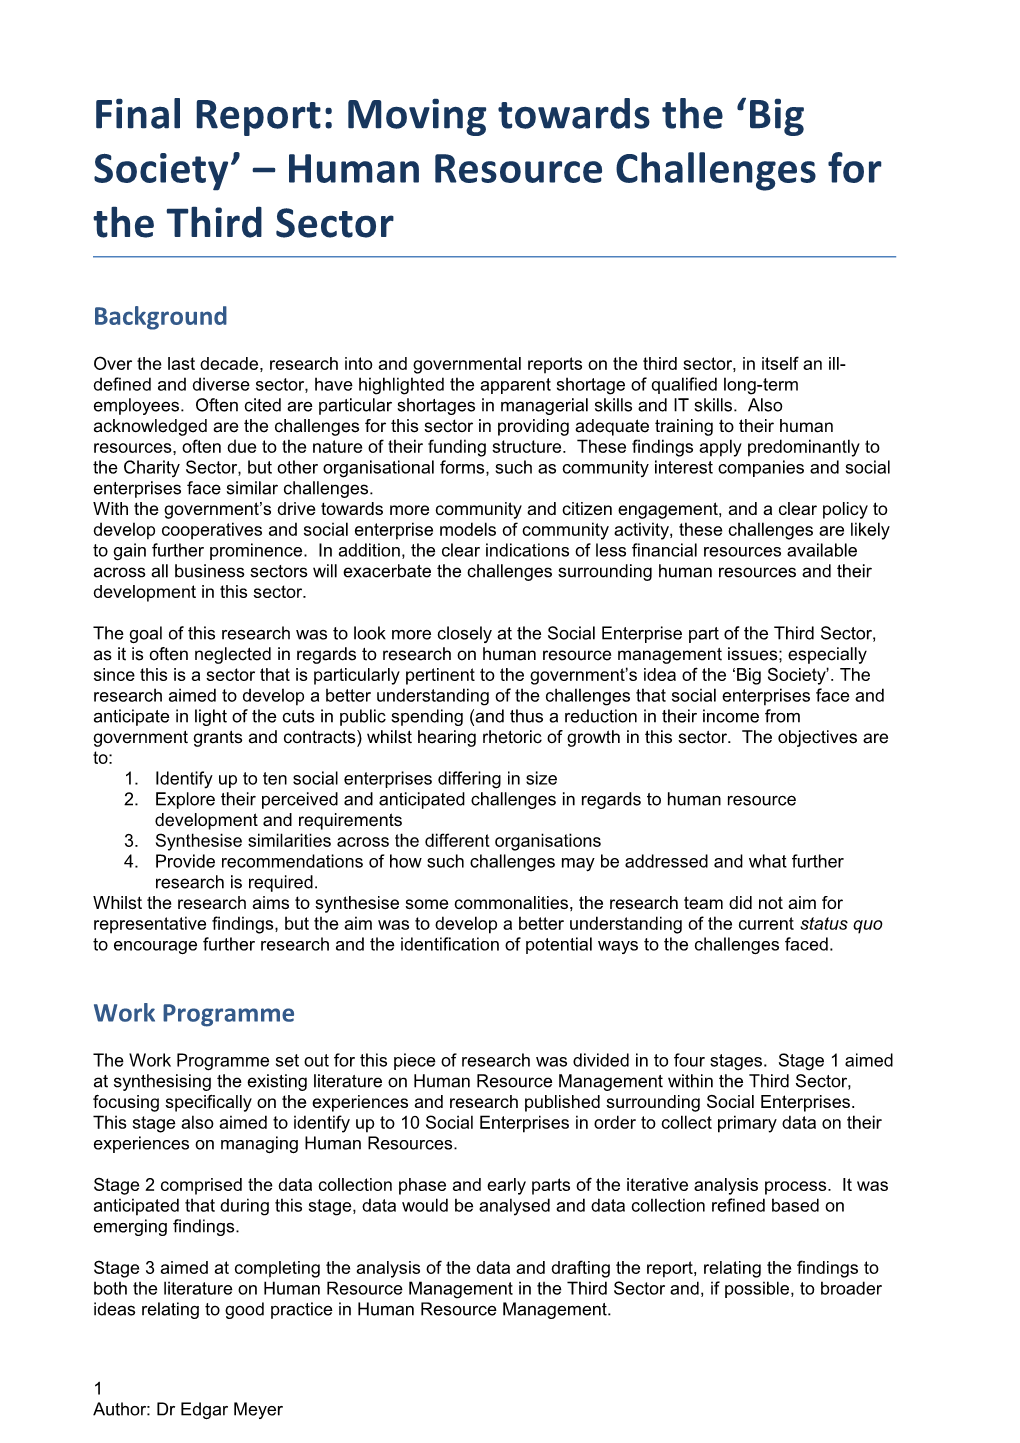 Final Report: Moving Towards the Big Society Human Resource Challenges for the Third Sector